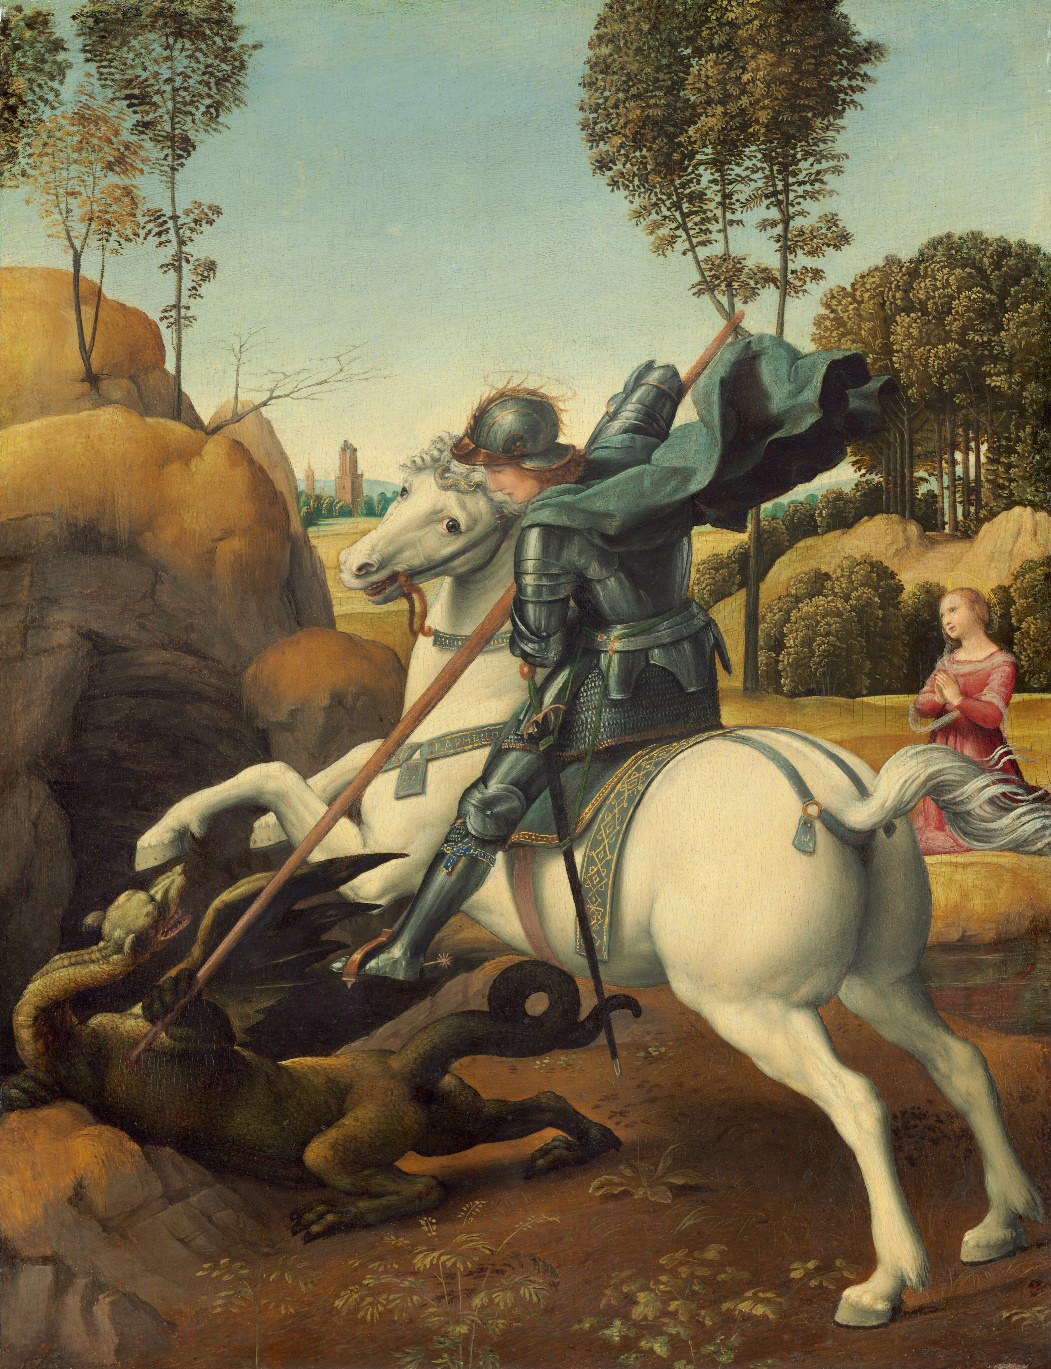 A saint dressed in armor riding on a white horse slays a dragon. A woman prays in the background.